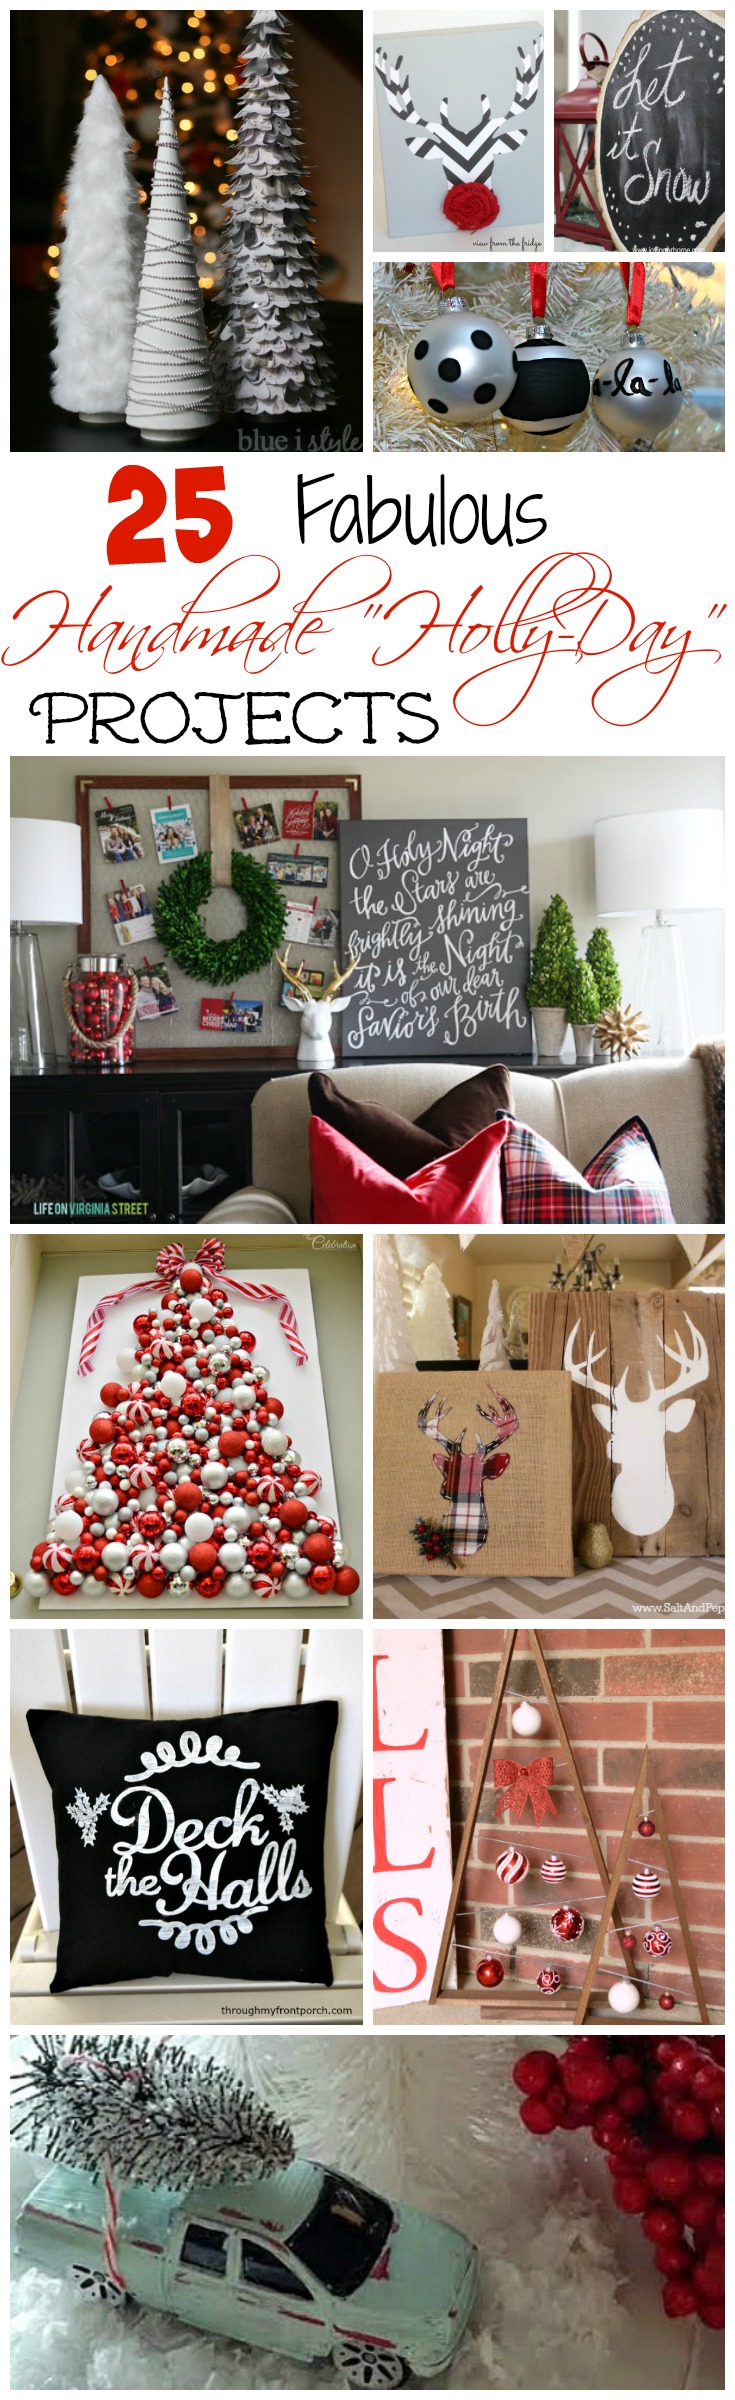 25 Fabulous Handmade Holly-day Projects at The Happy Housie poster.